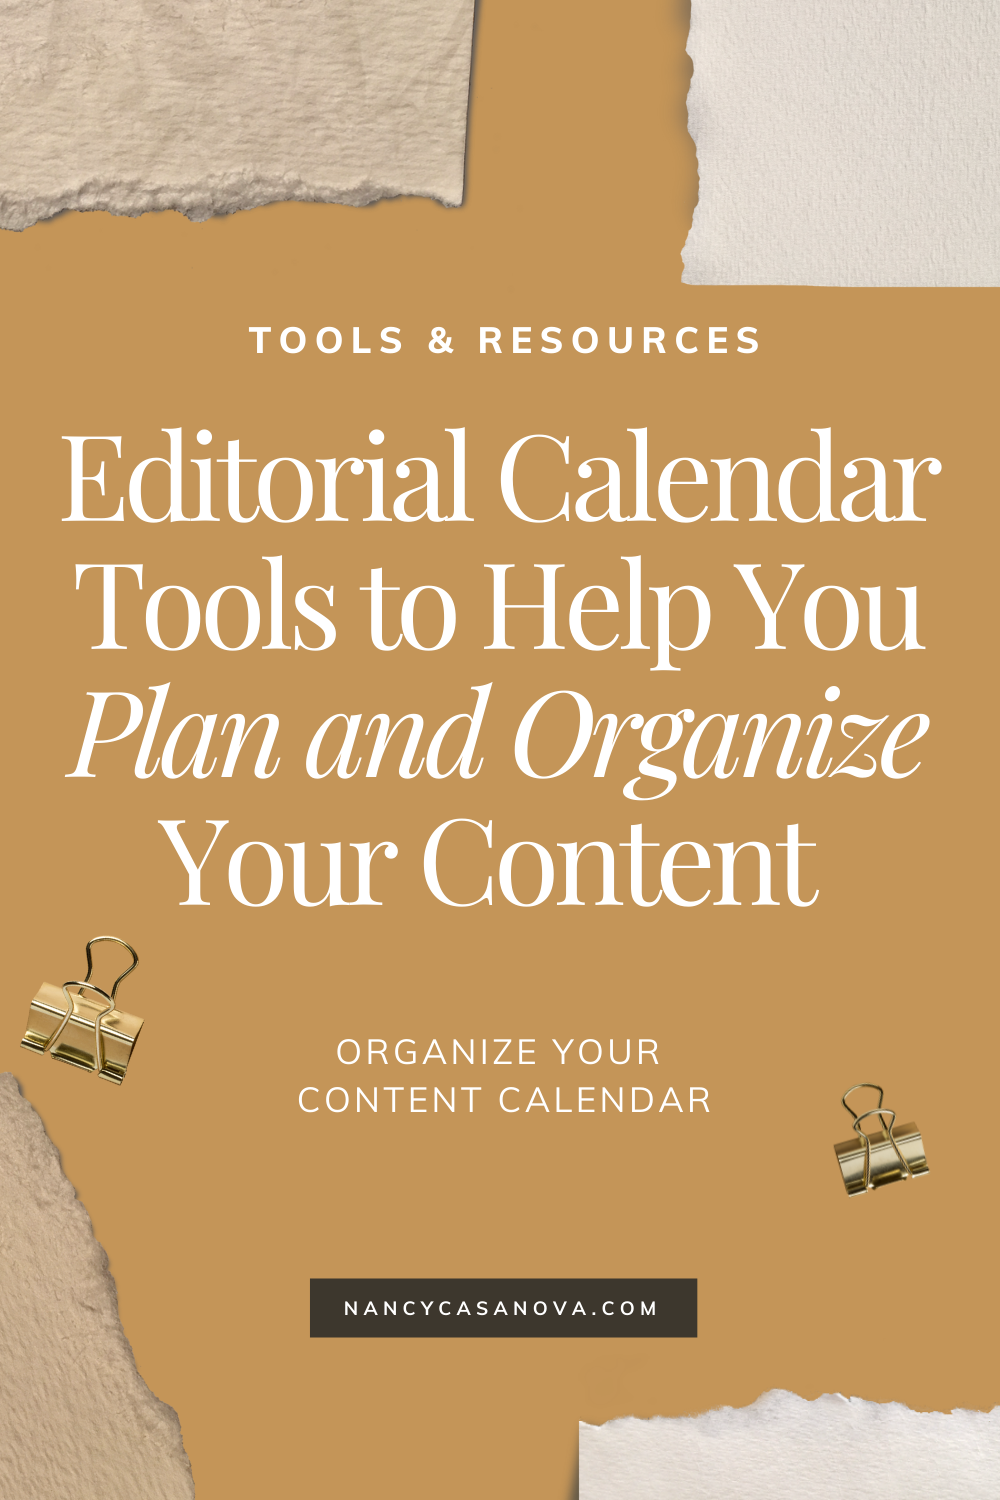 Here are some tools you can use to build and manage your editorial calendar. 